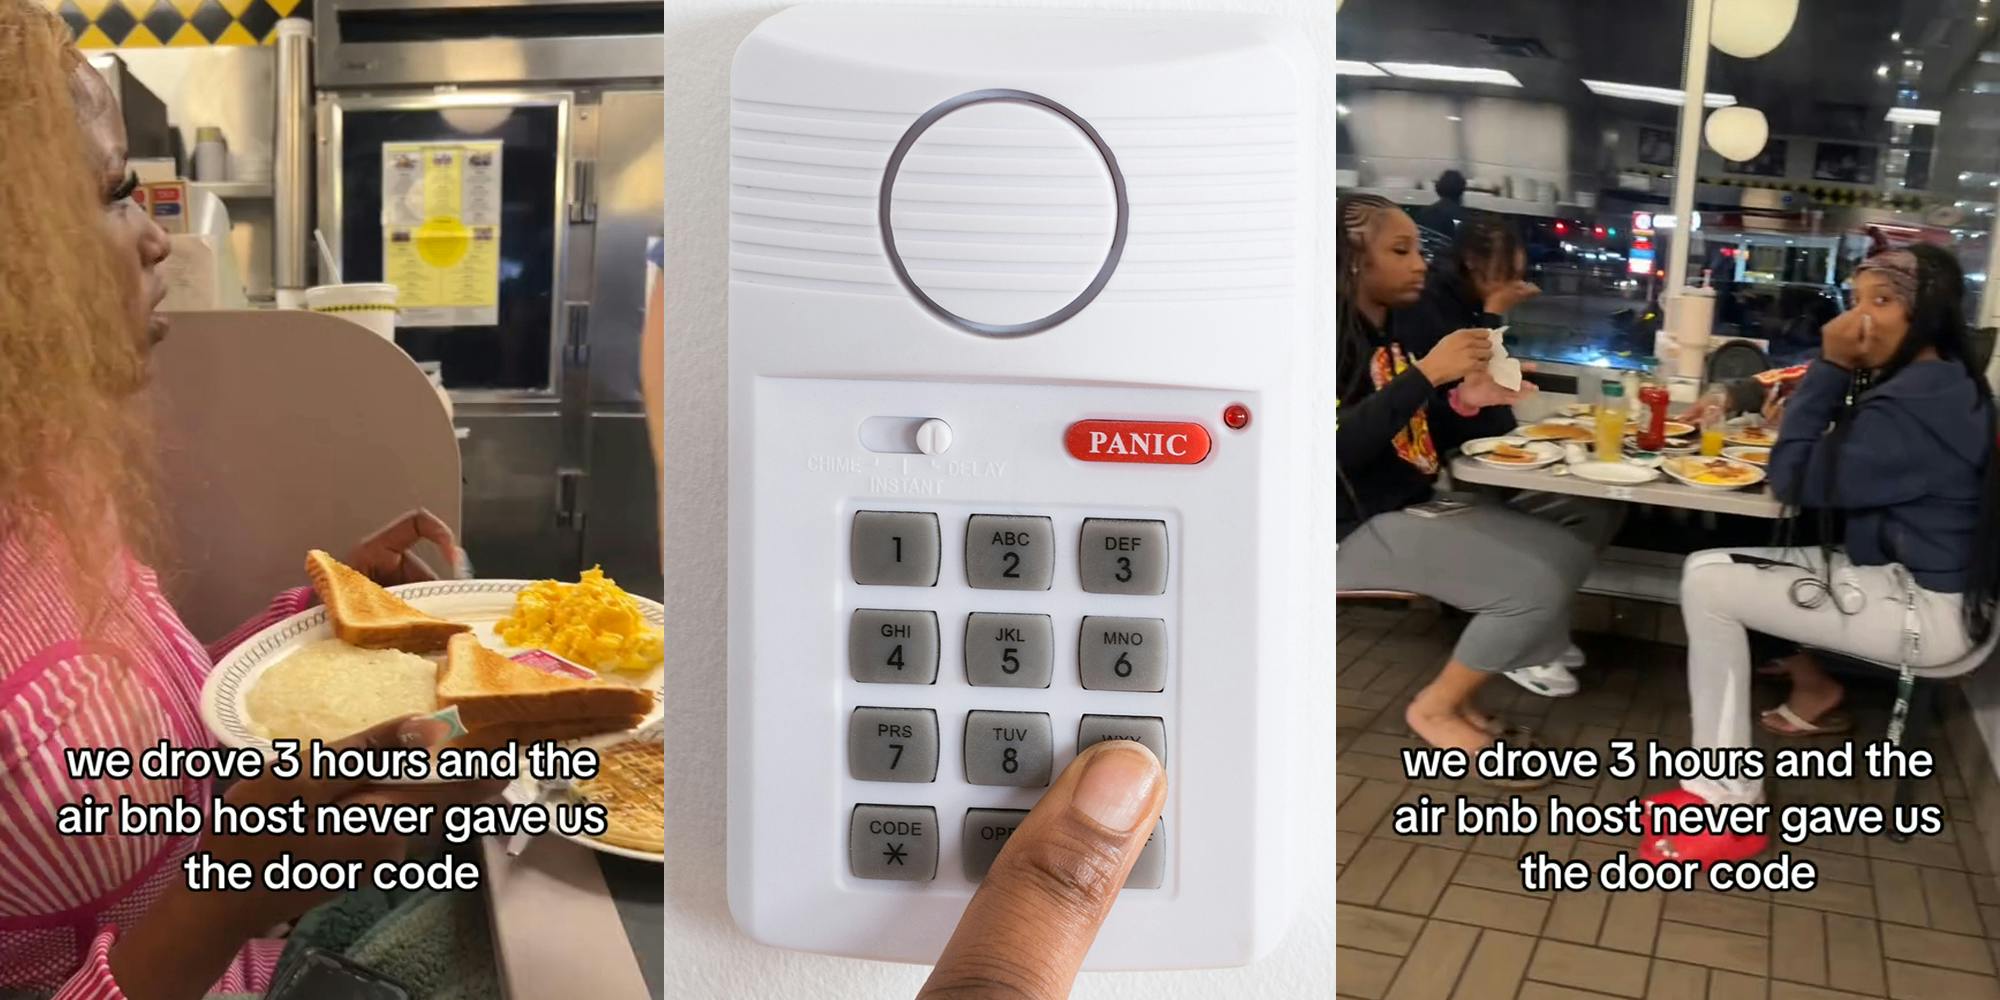 young women in Waffle House with caption 'we drove 3 hours and the air bnb host never gave us the door code' (l&r) door lock key code panel (c)